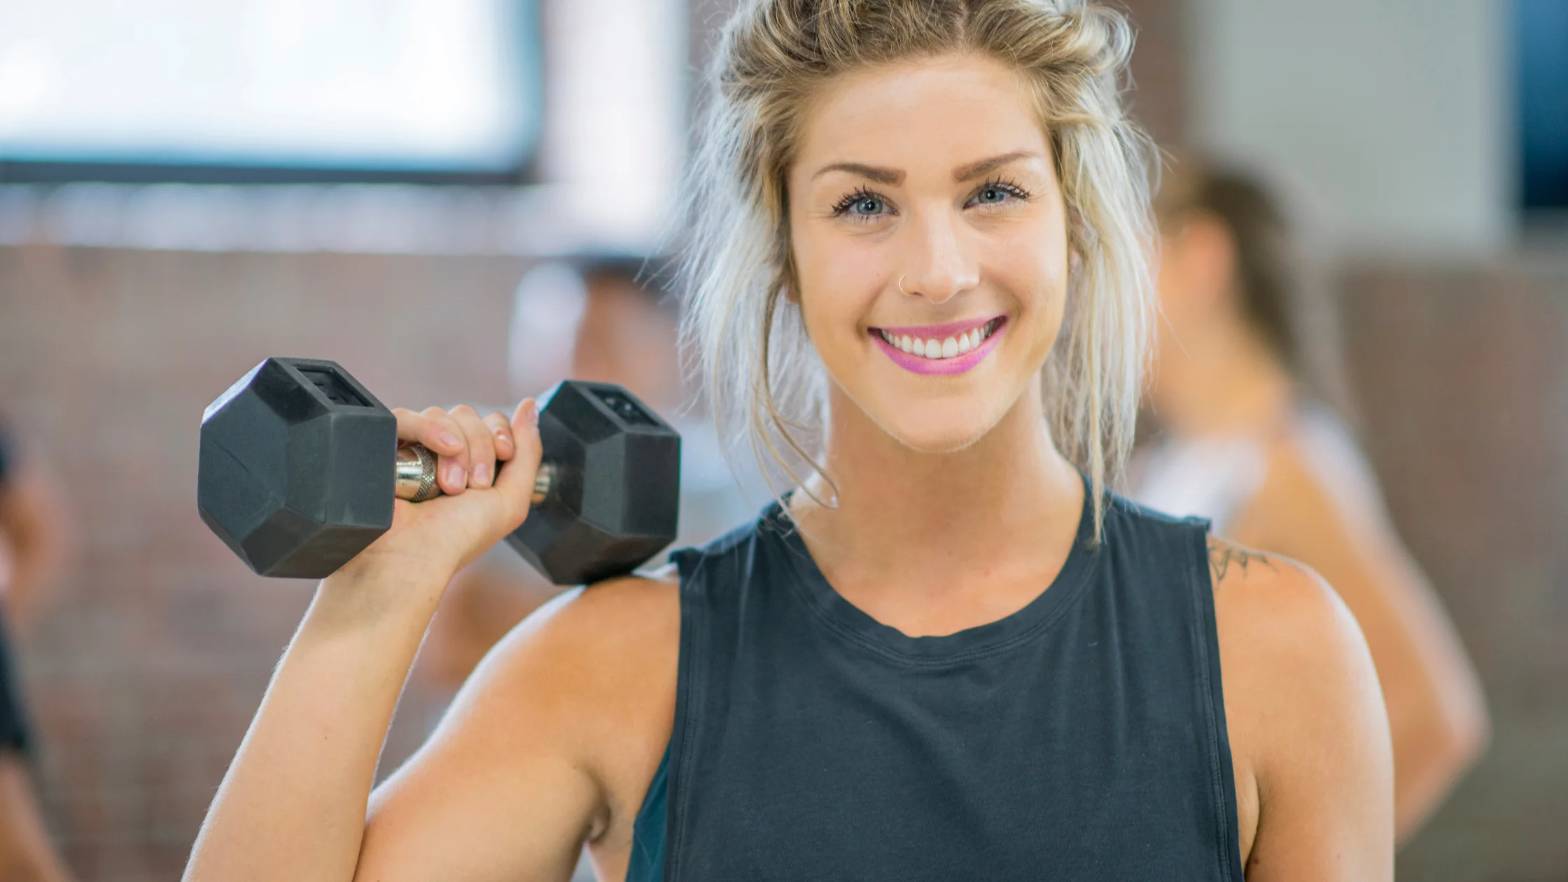 A woman happily lifting a dumbbell